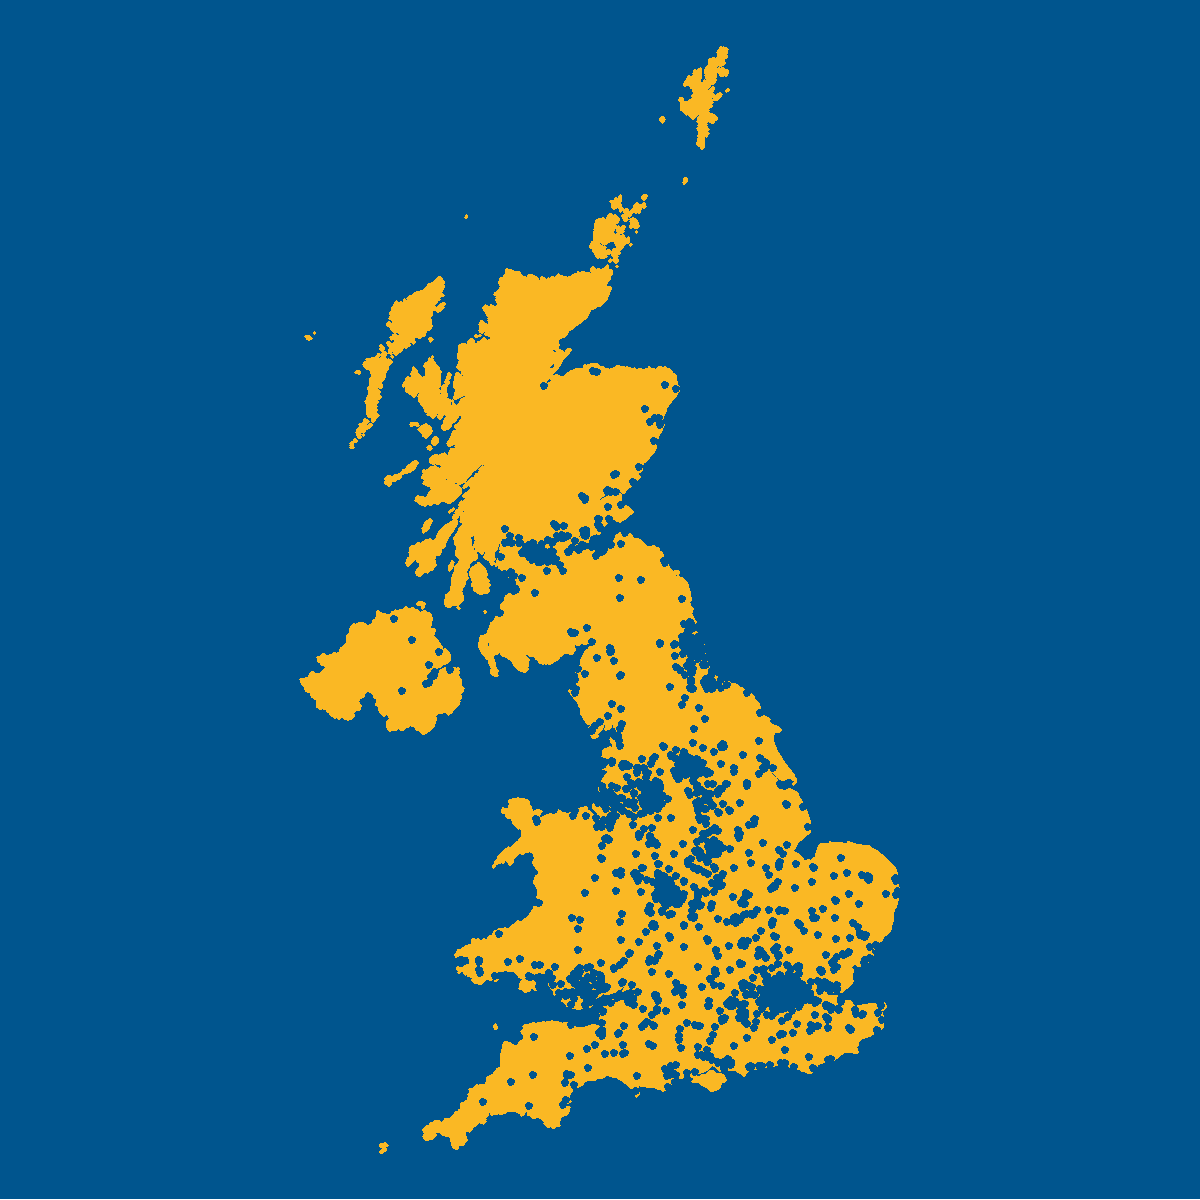 Map of UK coloured in yellow with blue background. Blue points highlight locations of branches of Greggs